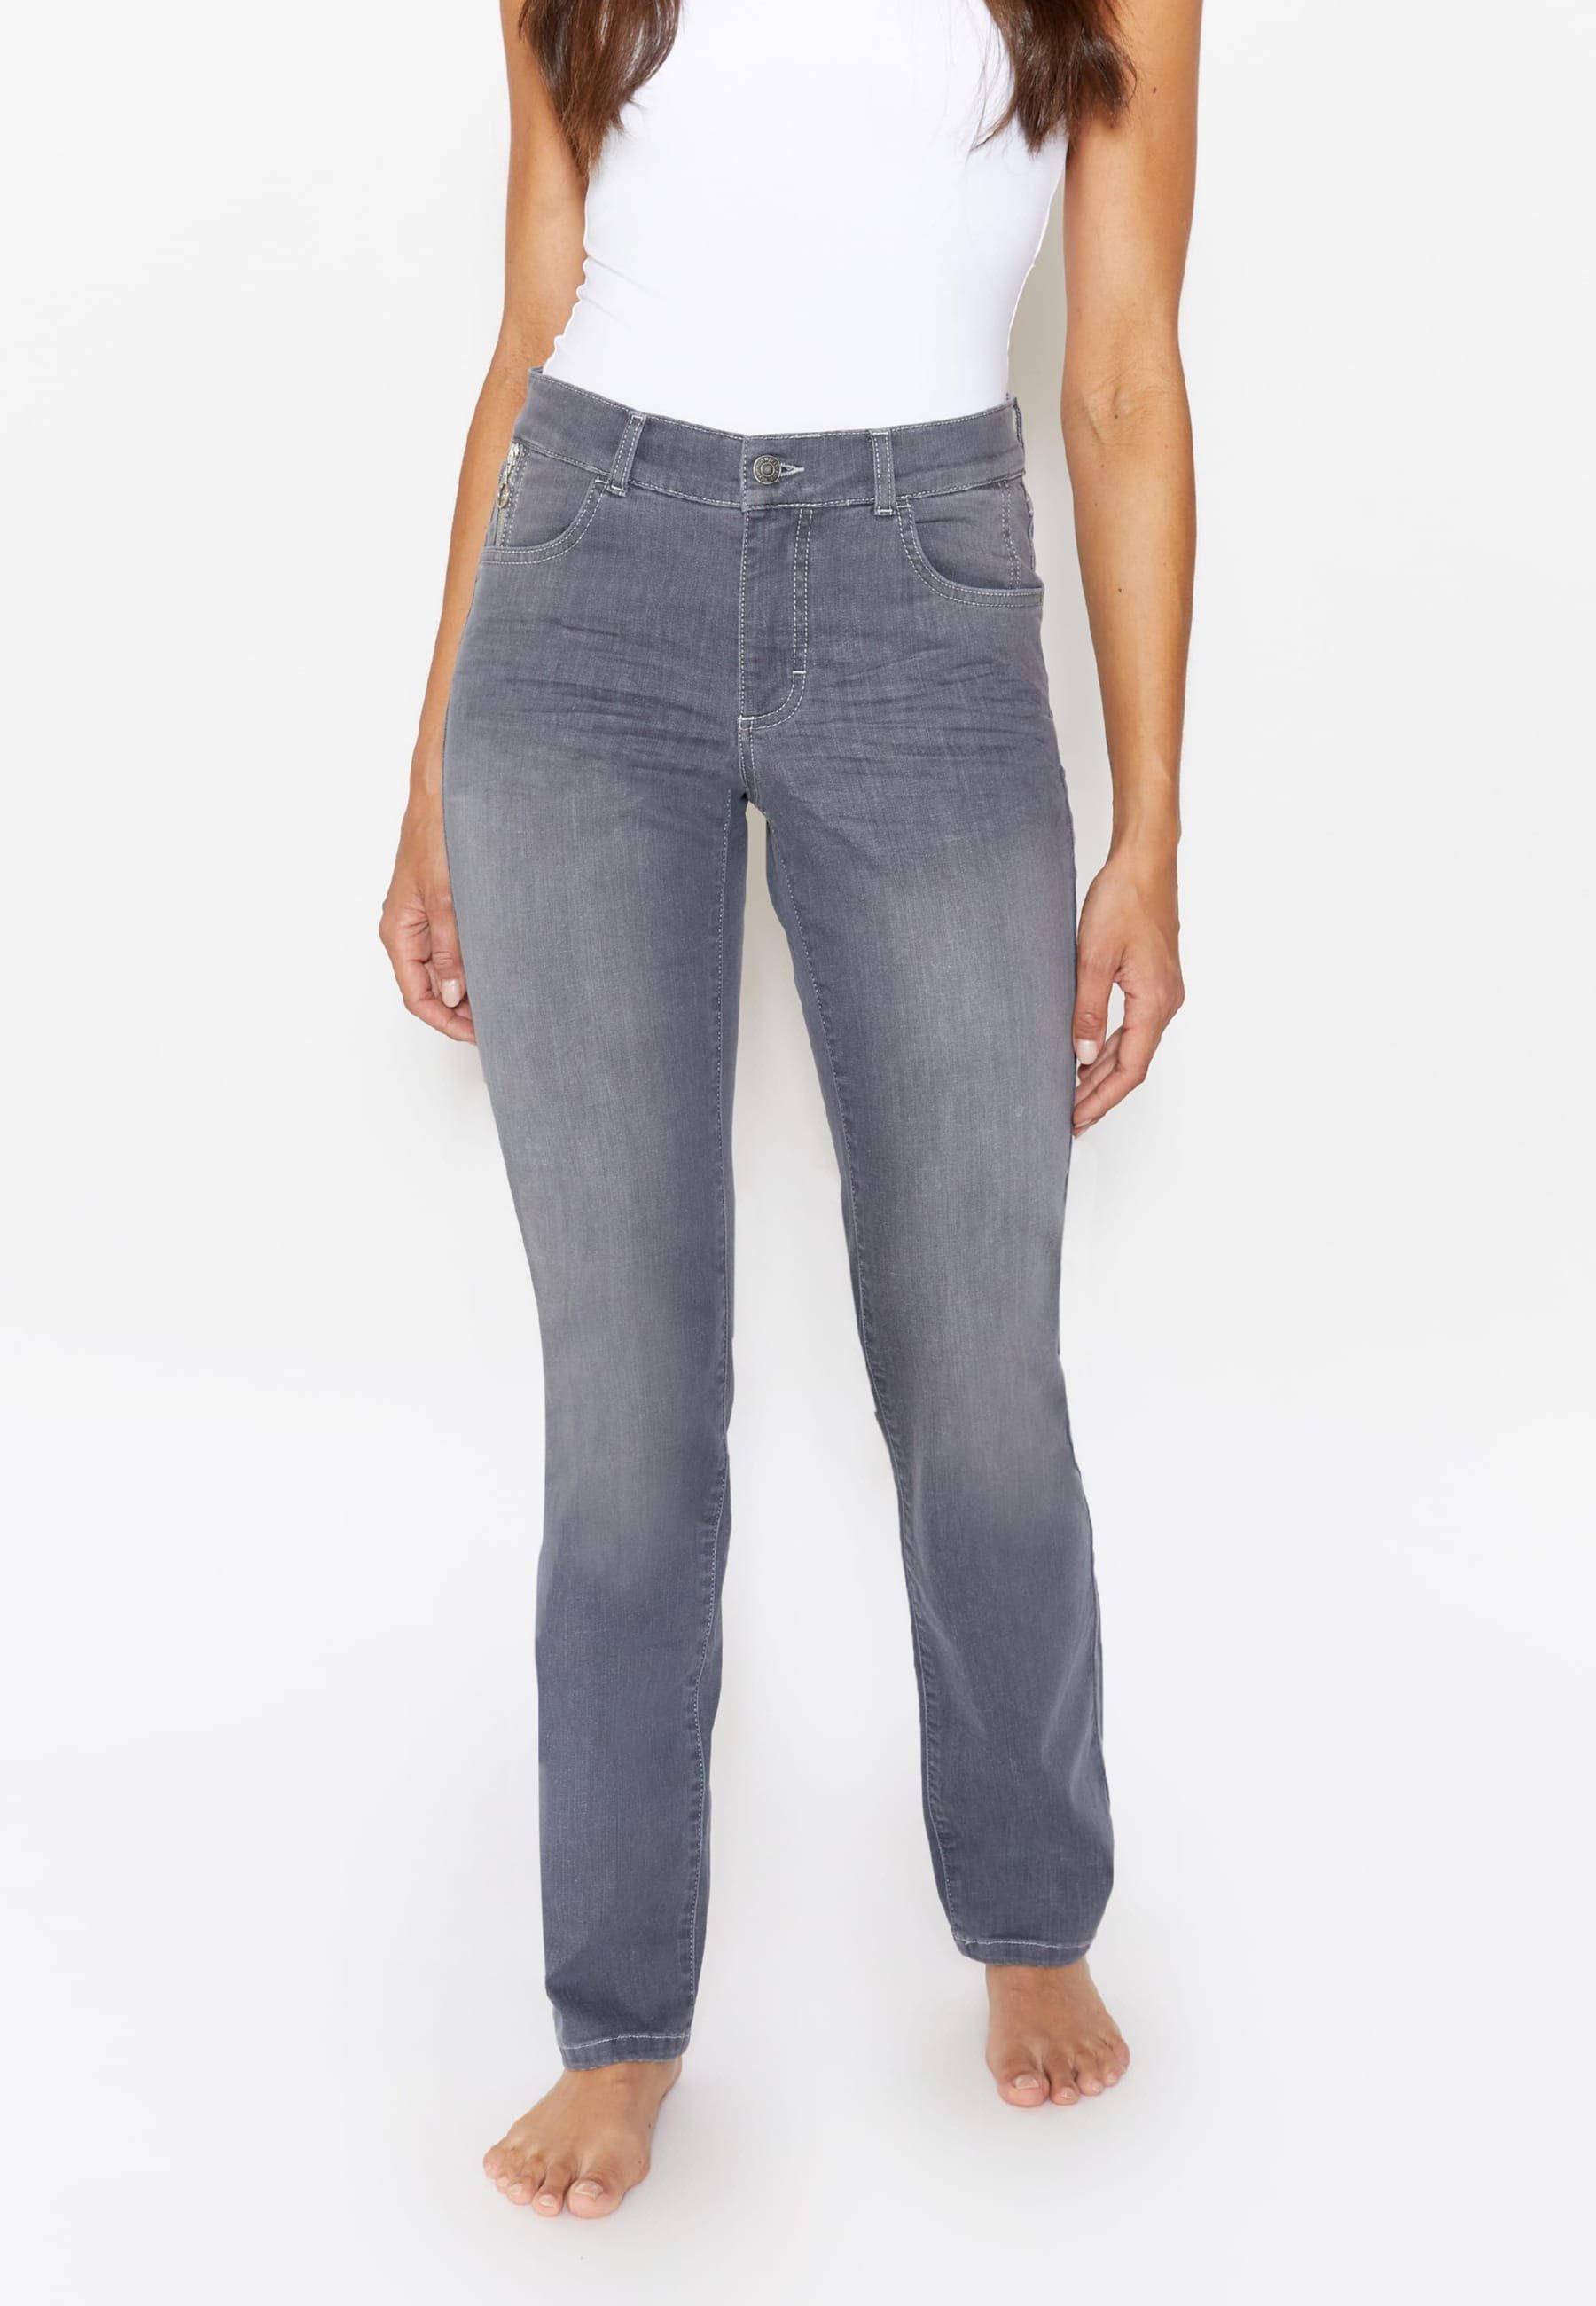 5-Pocket-Jeans grau Straight-Jeans Dolly ANGELS 2.0